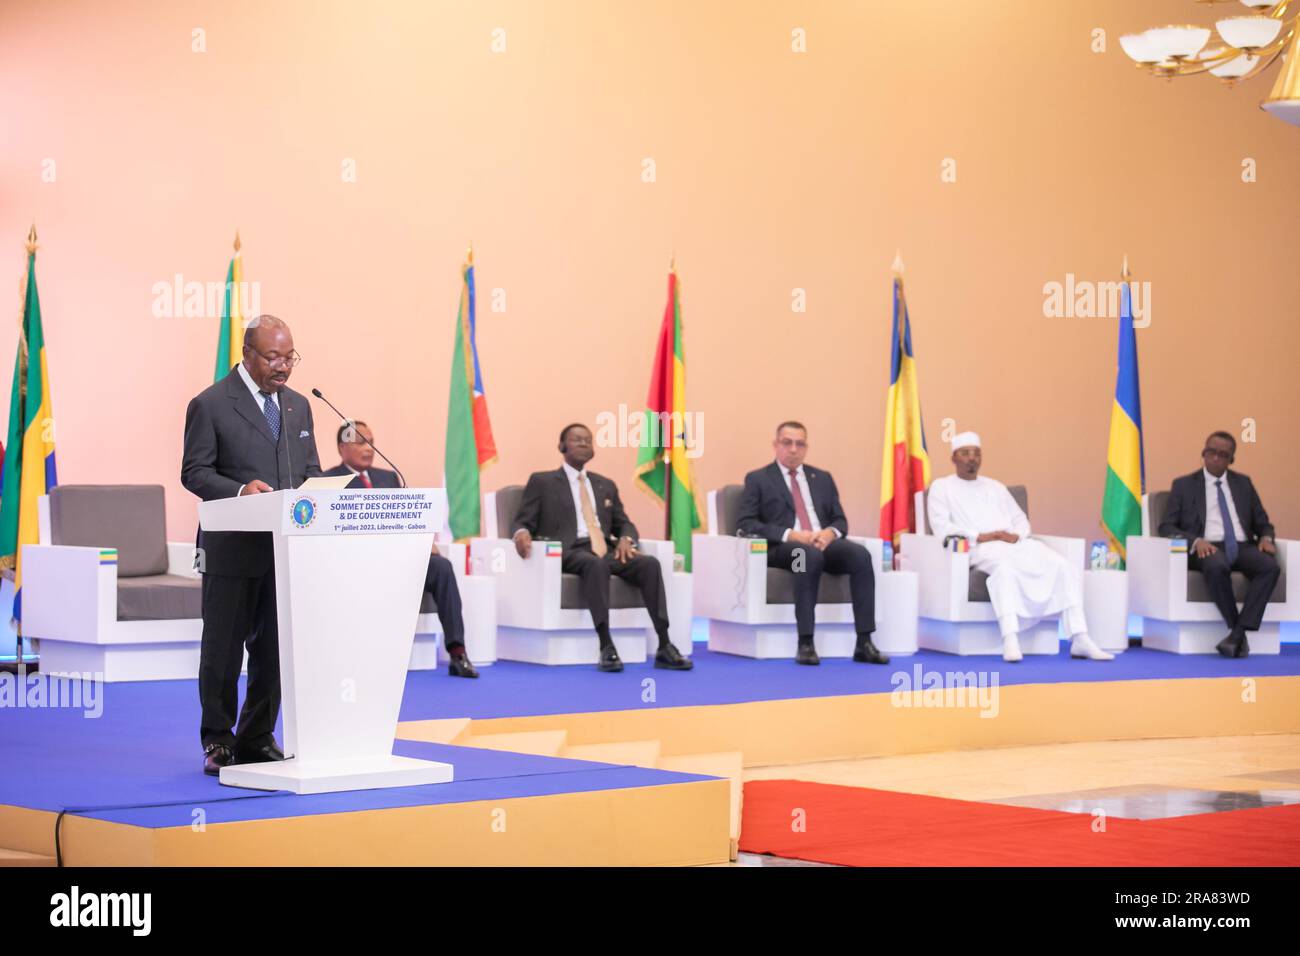 (230702) -- LIBREVILLE, July 2, 2023 (Xinhua) -- Gabonese President Ali Bongo Ondimba makes opening remarks at the 23rd ordinary summit of the Economic Community of Central African States (ECCAS) in Libreville, capital of Gabon, July 1, 2023. The 23rd ECCAS ordinary summit kicked off on Saturday in Libreville, with 11 member states discussing issues of regional security and integration. (Gabonese Presidency/Handout via Xinhua) Stock Photo